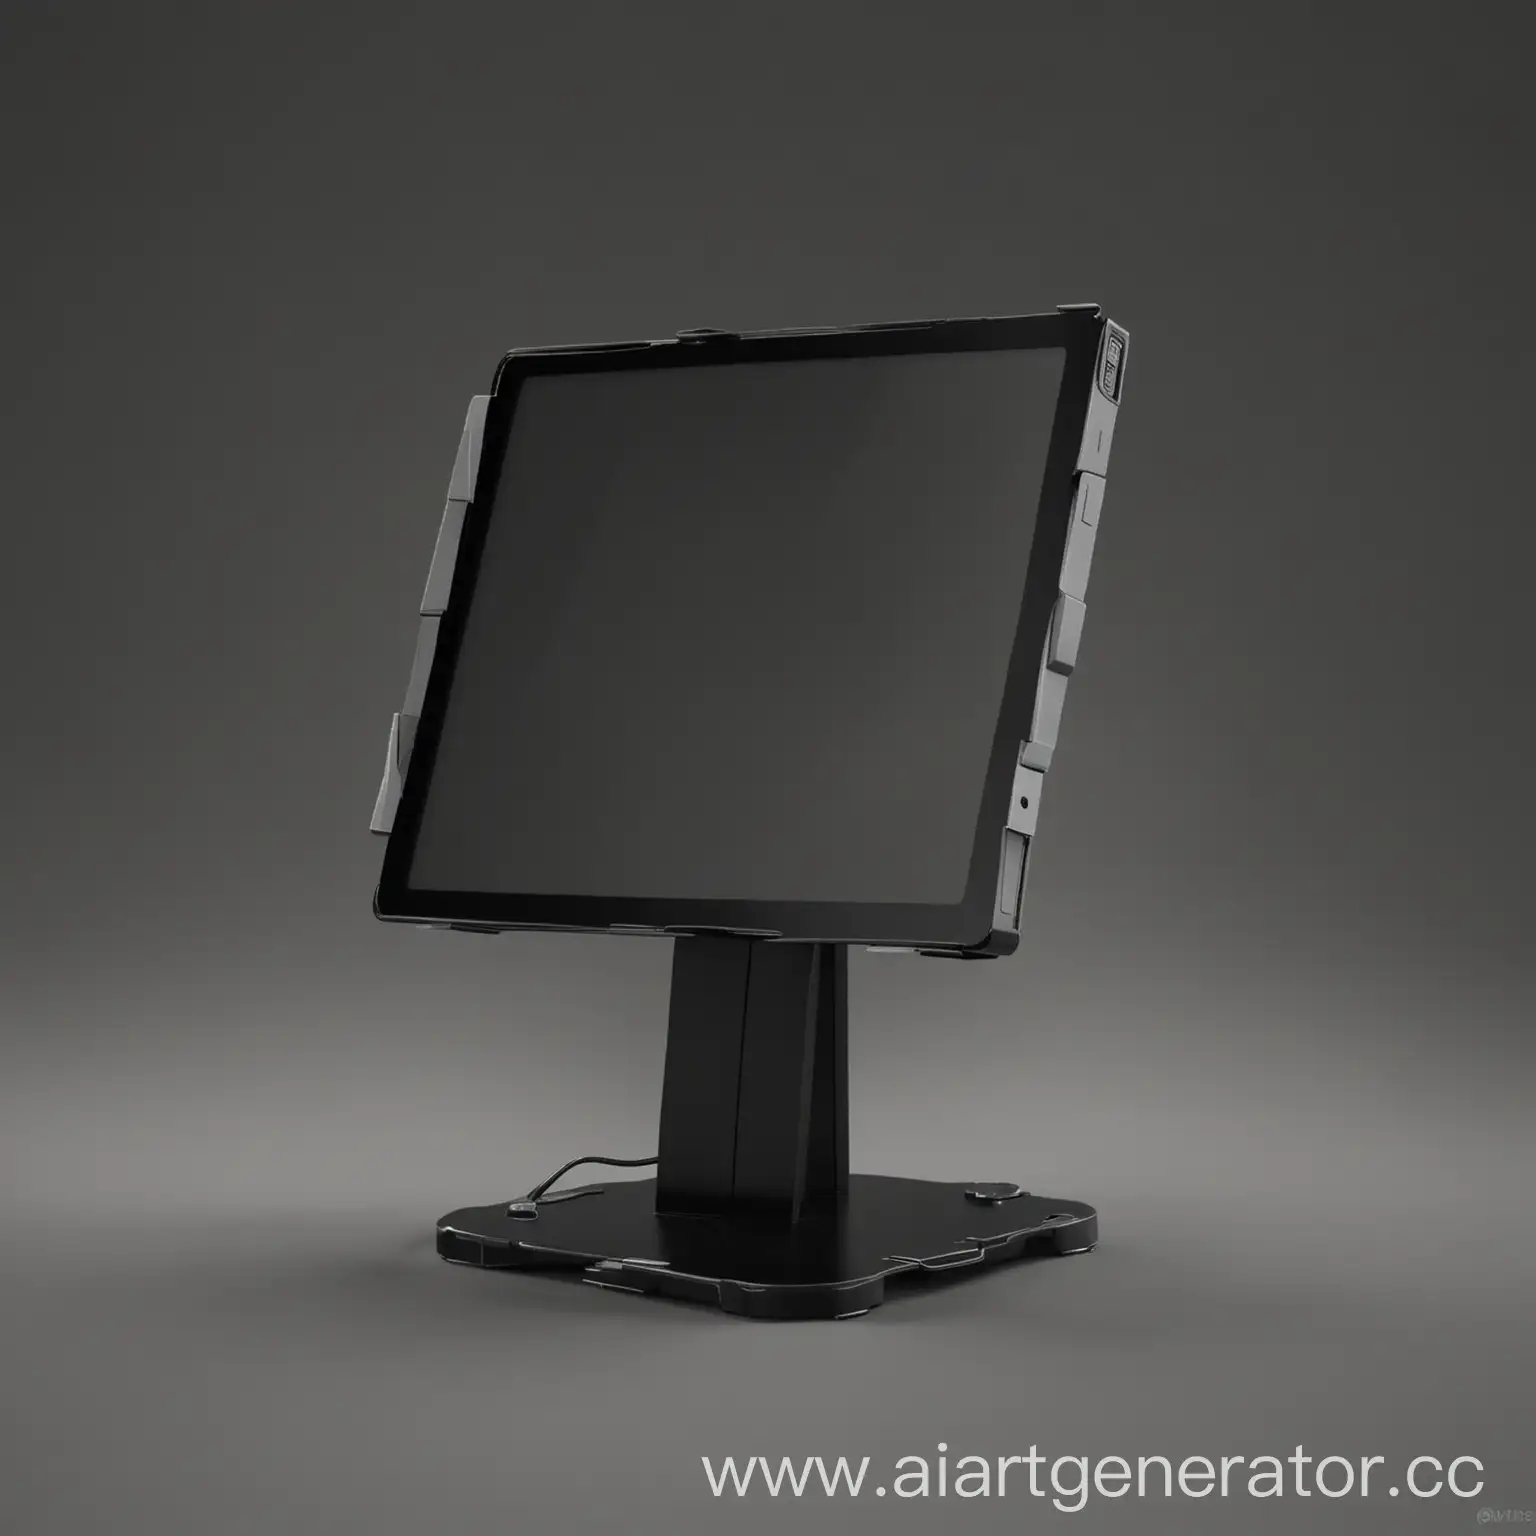 Modern-Electronic-Gadget-with-Sleek-Screen-on-Black-Stand